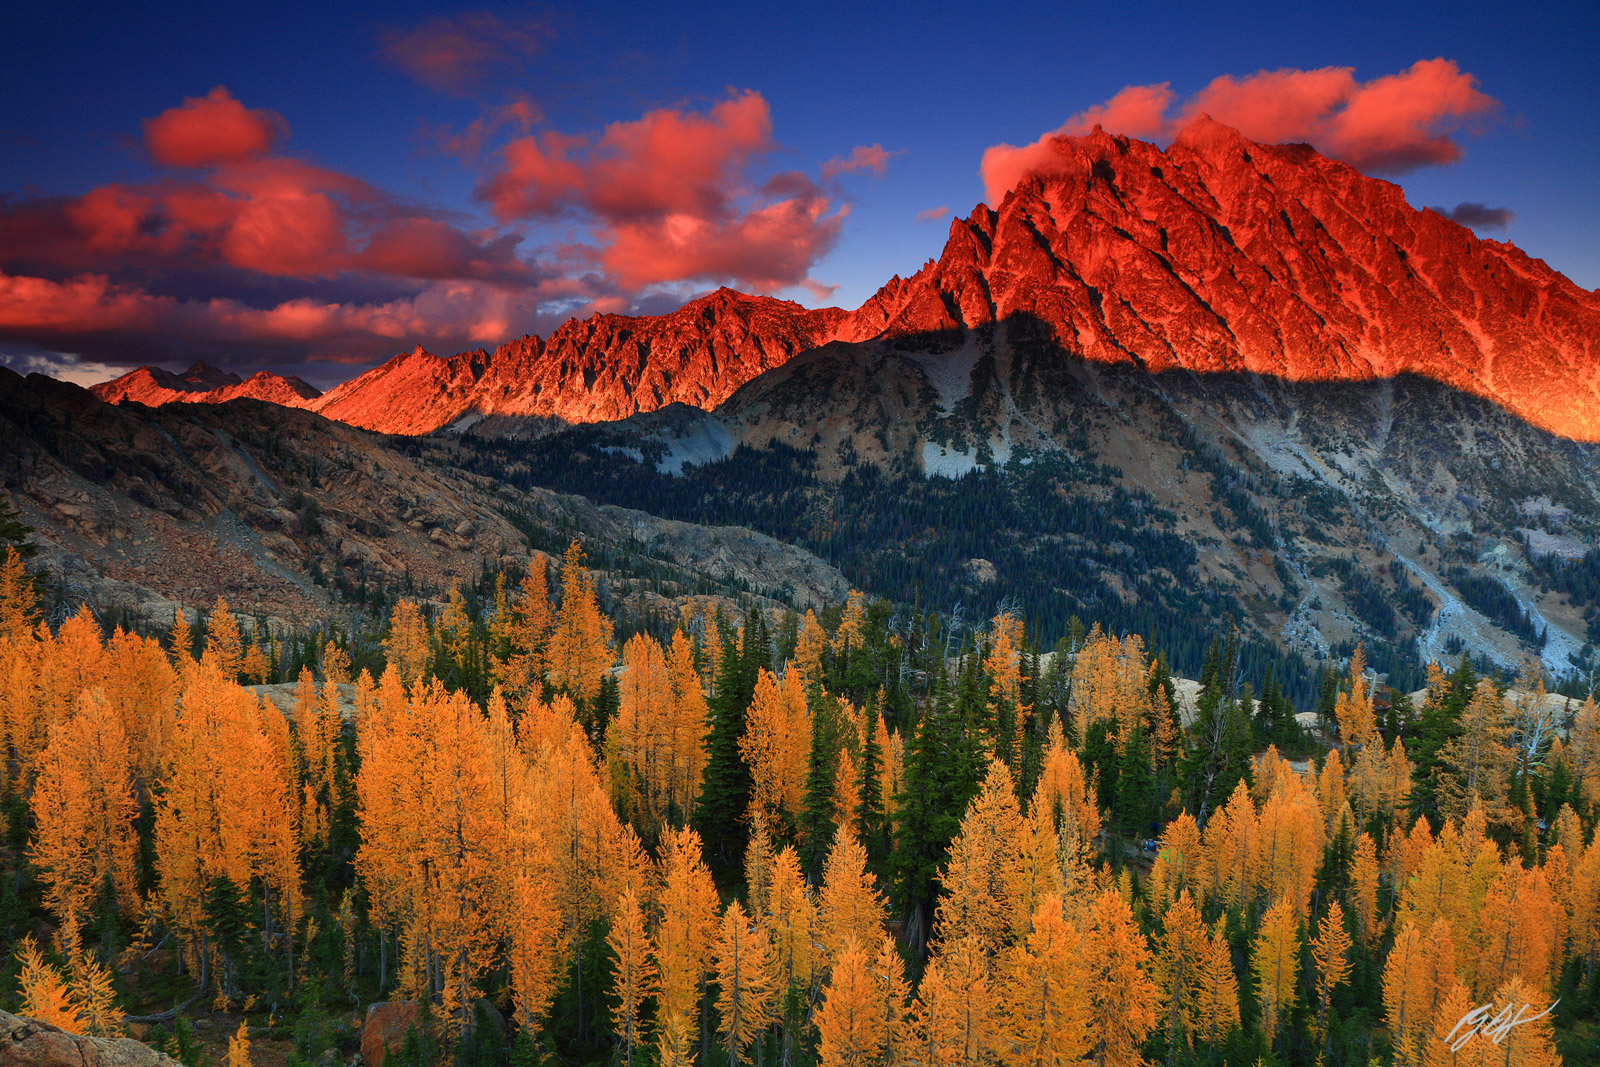 Sunset Golden Larch and Mt Stuart from the Lake Ingalls Trail in the alpine Lakes Wilderness, in Washington